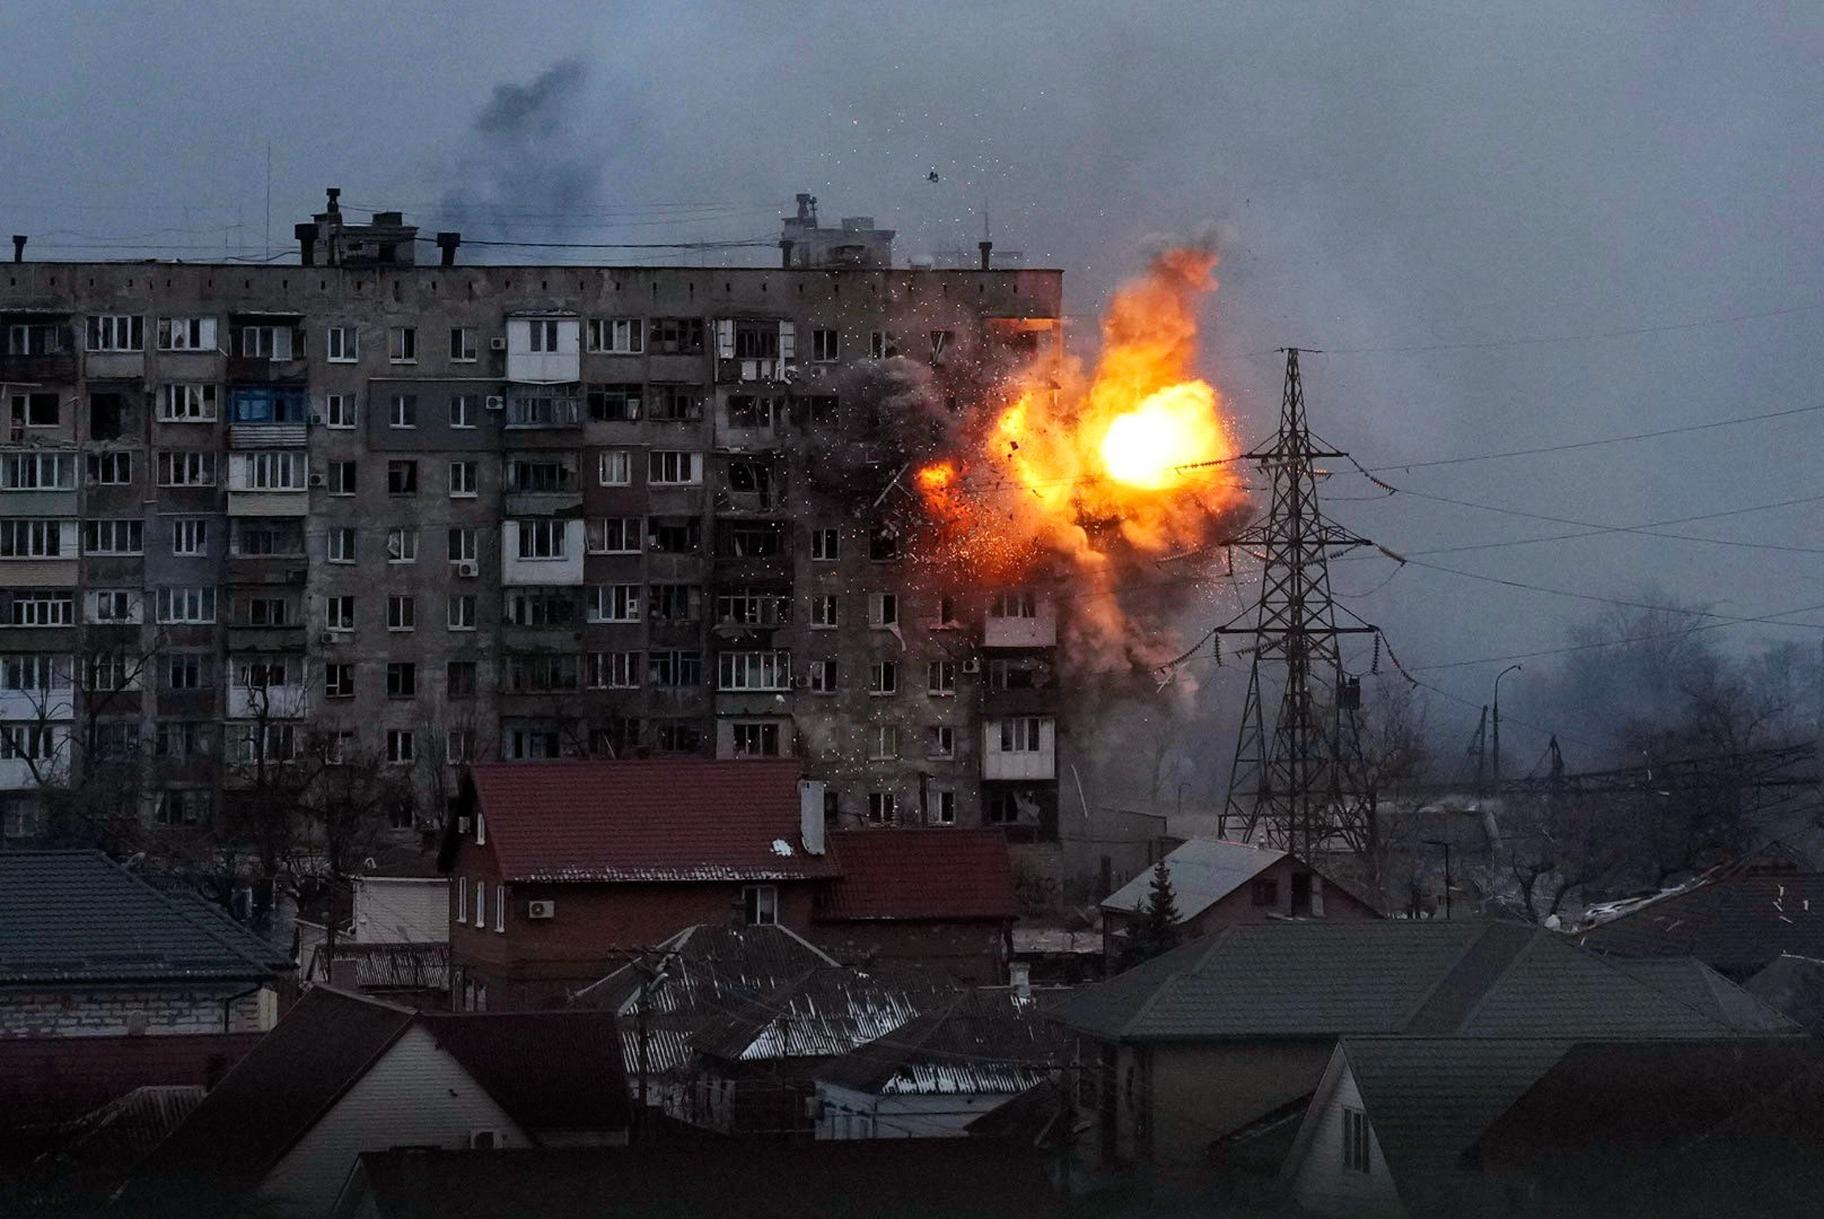 An explosion is seen in an apartment building after a Russian army tank fires in Mariupol, Ukraine, March 11, 2022. Still from FRONTLINE PBS and AP’s feature film “20 Days in Mariupol.” (AP Photo / Evgeniy Maloletka)